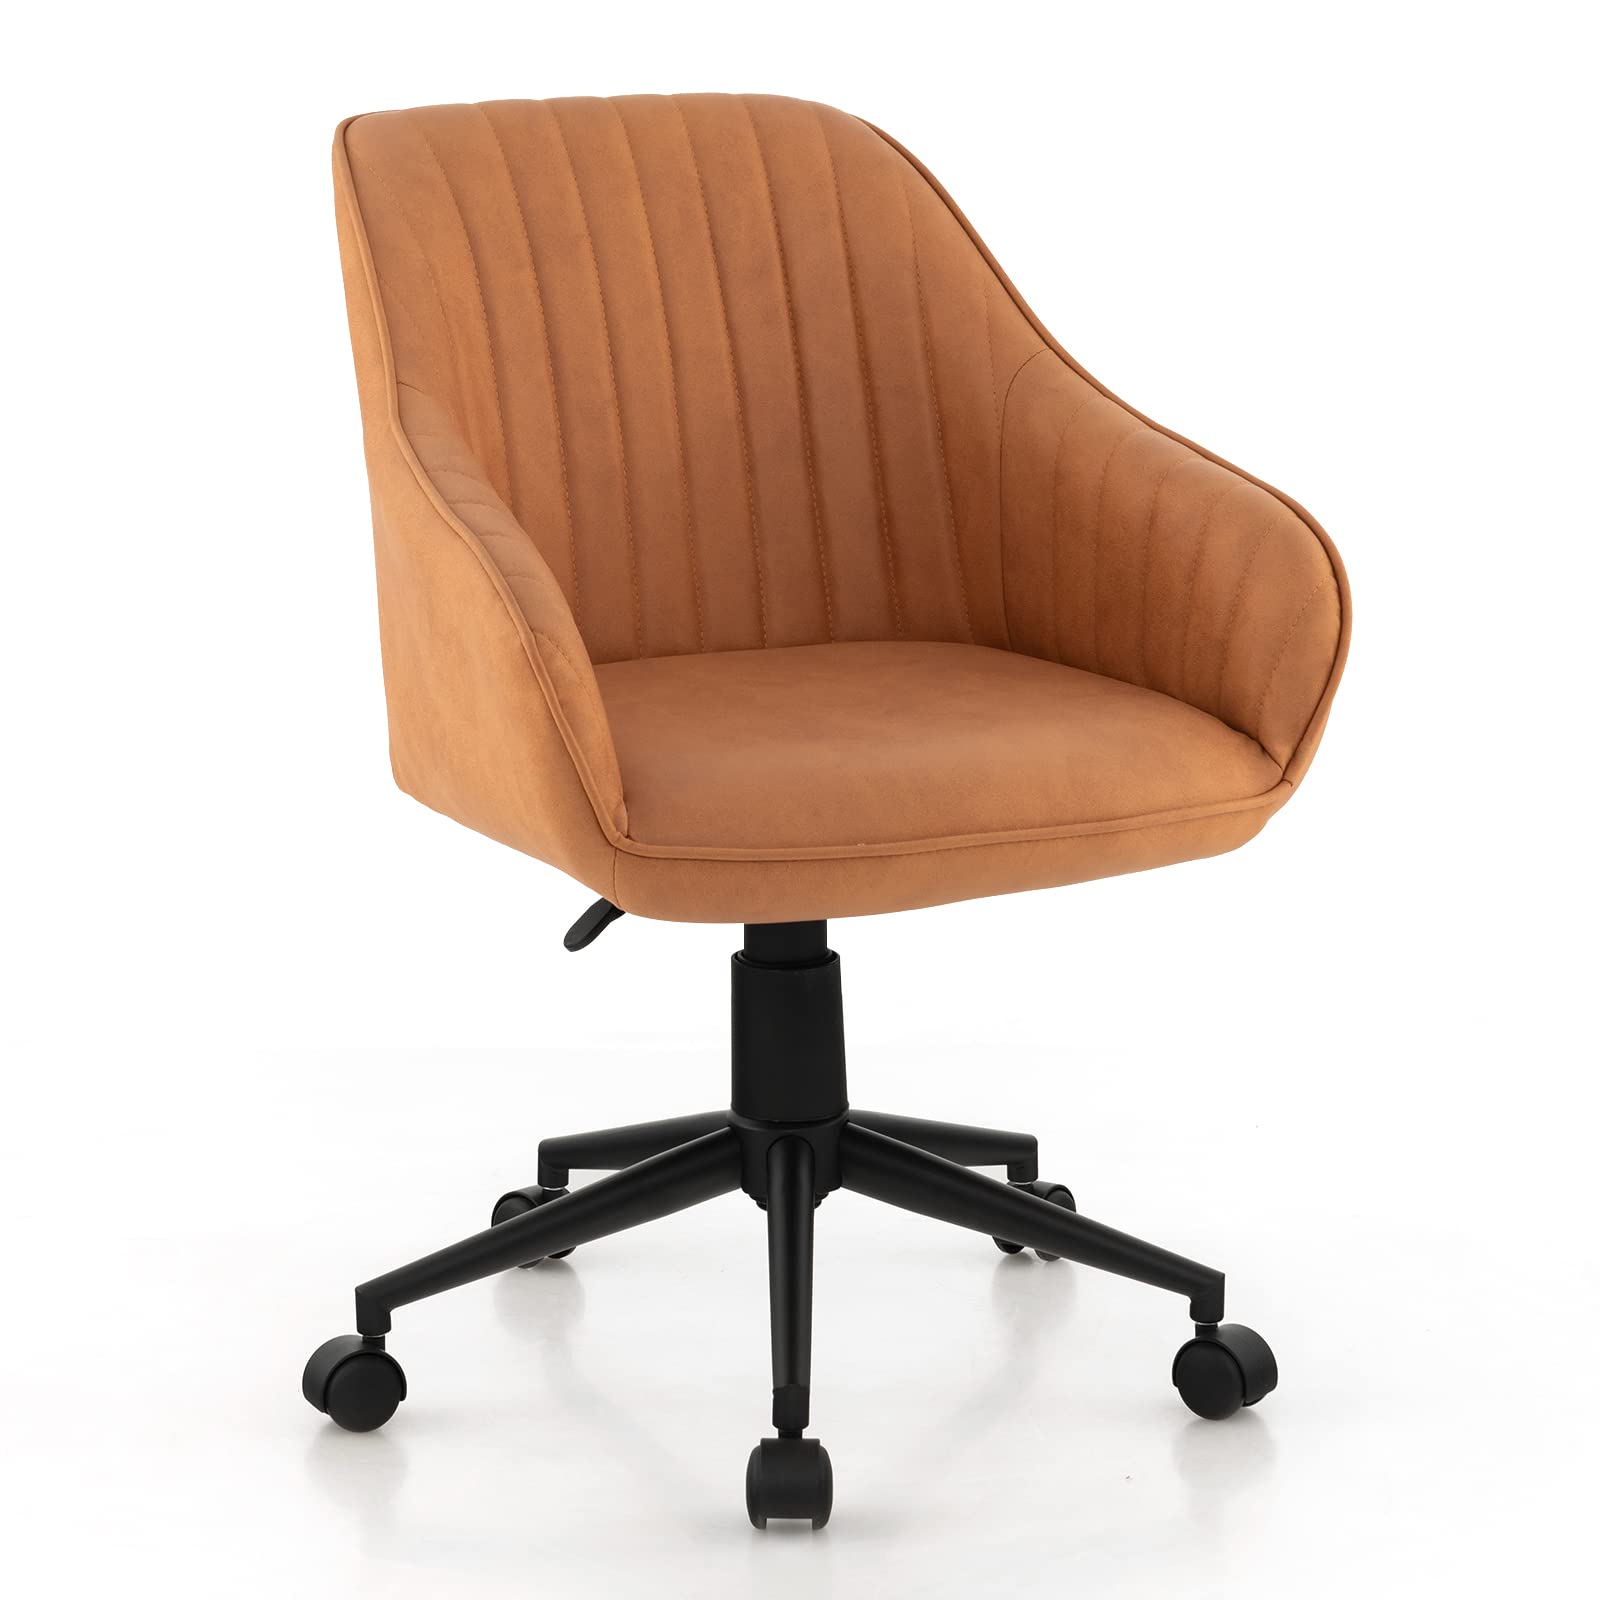 Giantex Leather Office Chair Brown, Mid Century Desk Chair with Wheels and Ergonomic Armrests